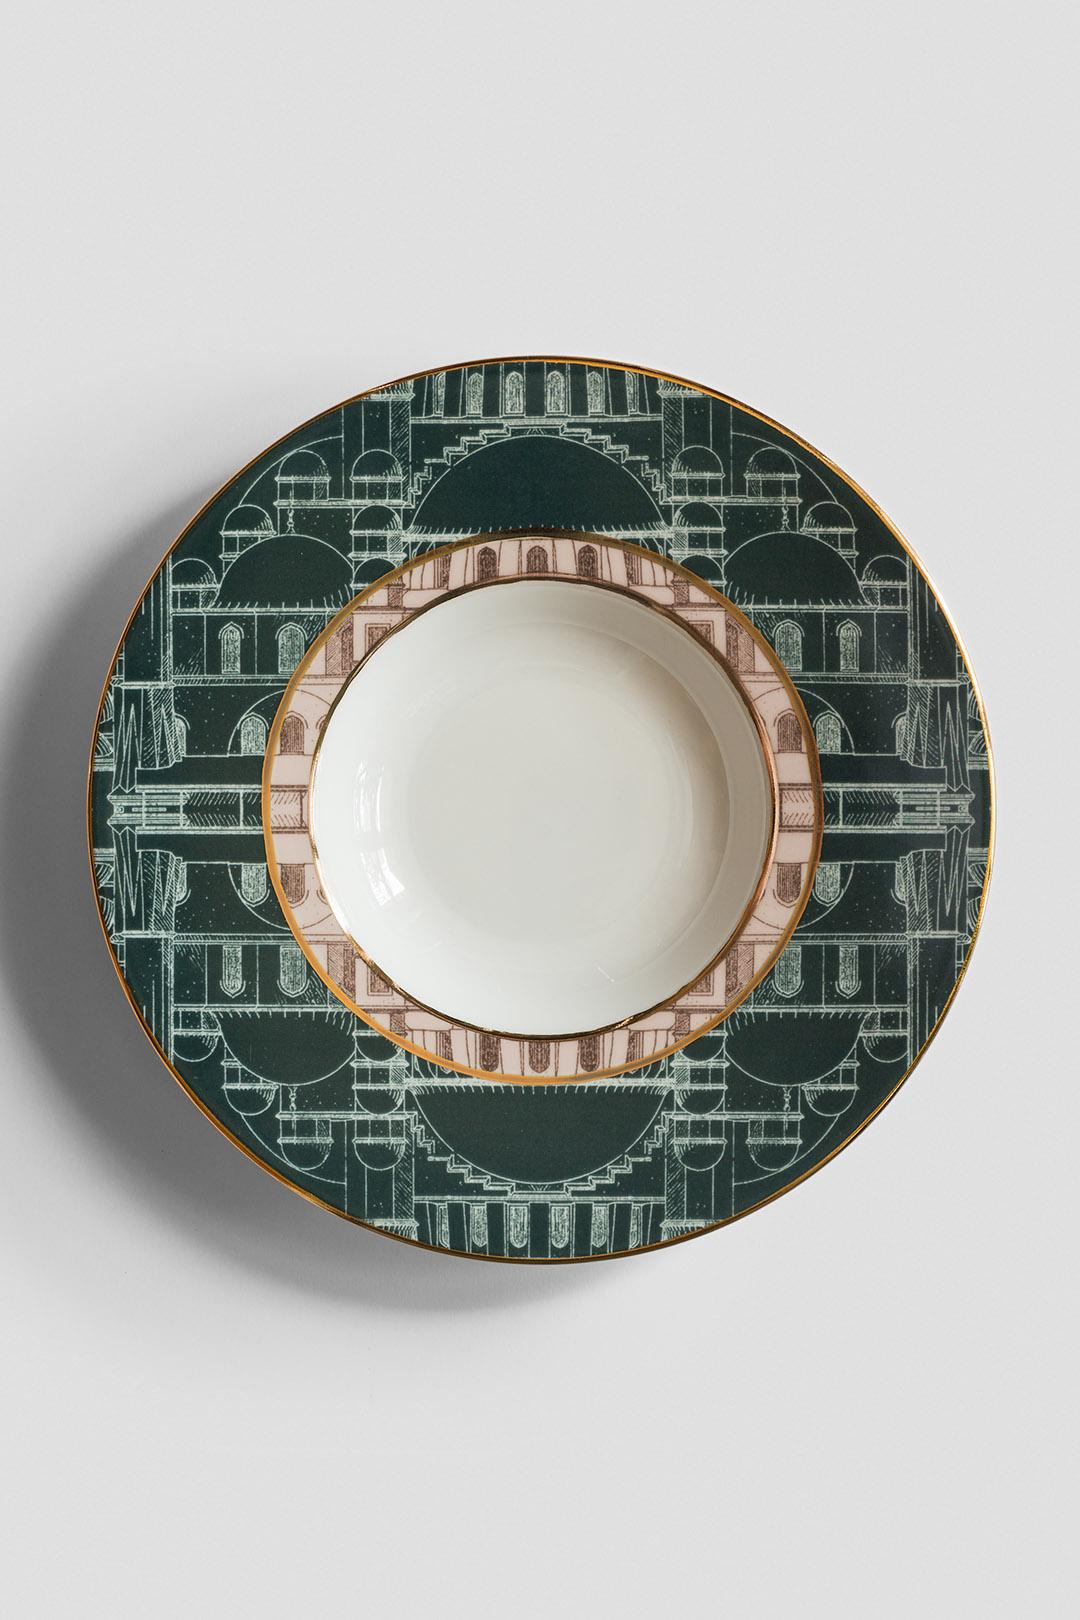 made in italy dinnerware